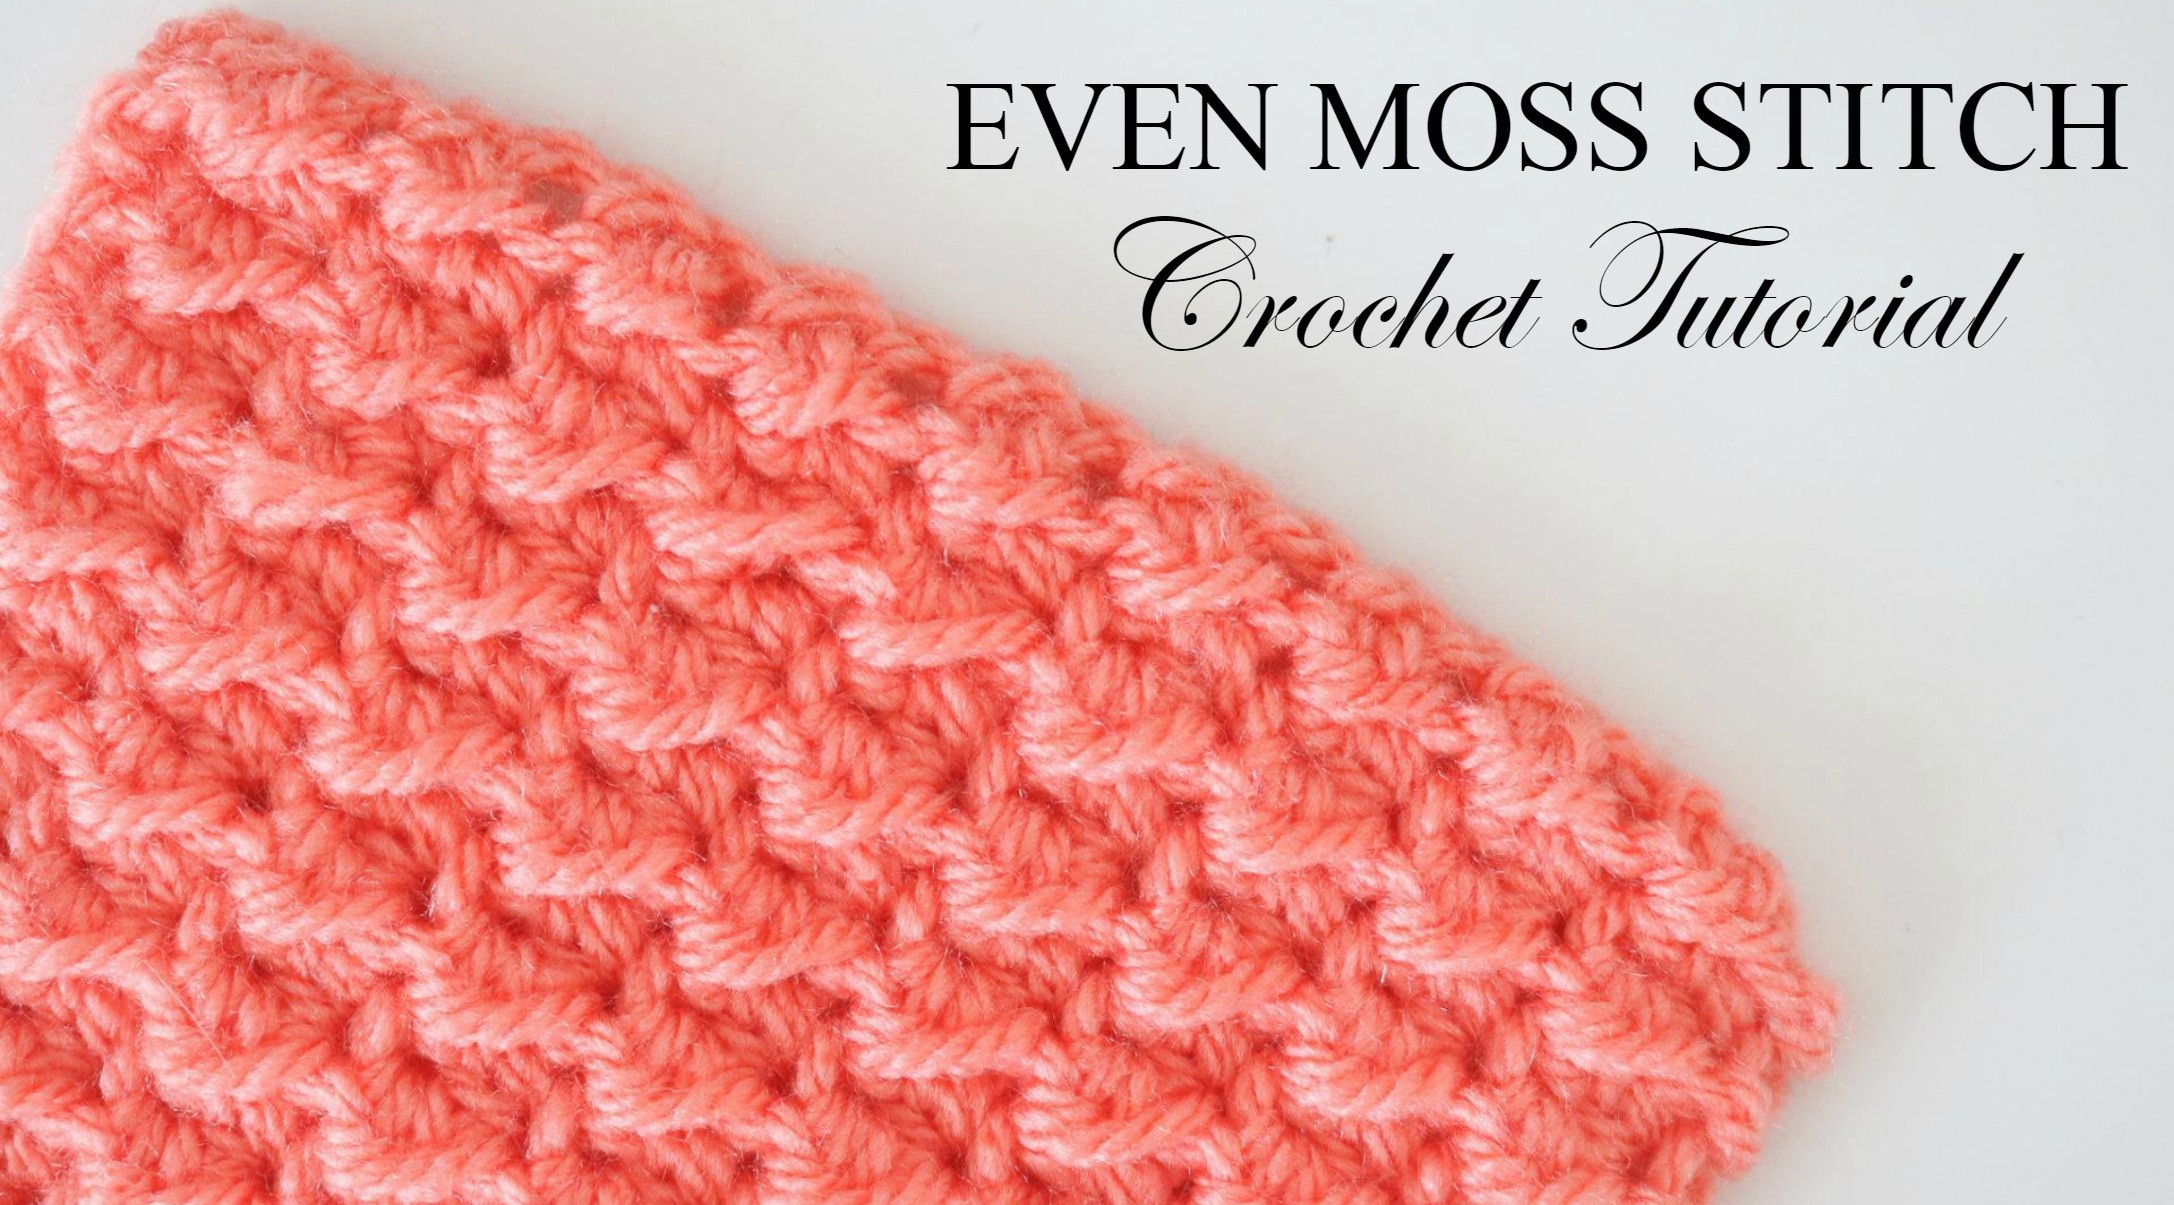 How To Crochet The Even Moss Stitch